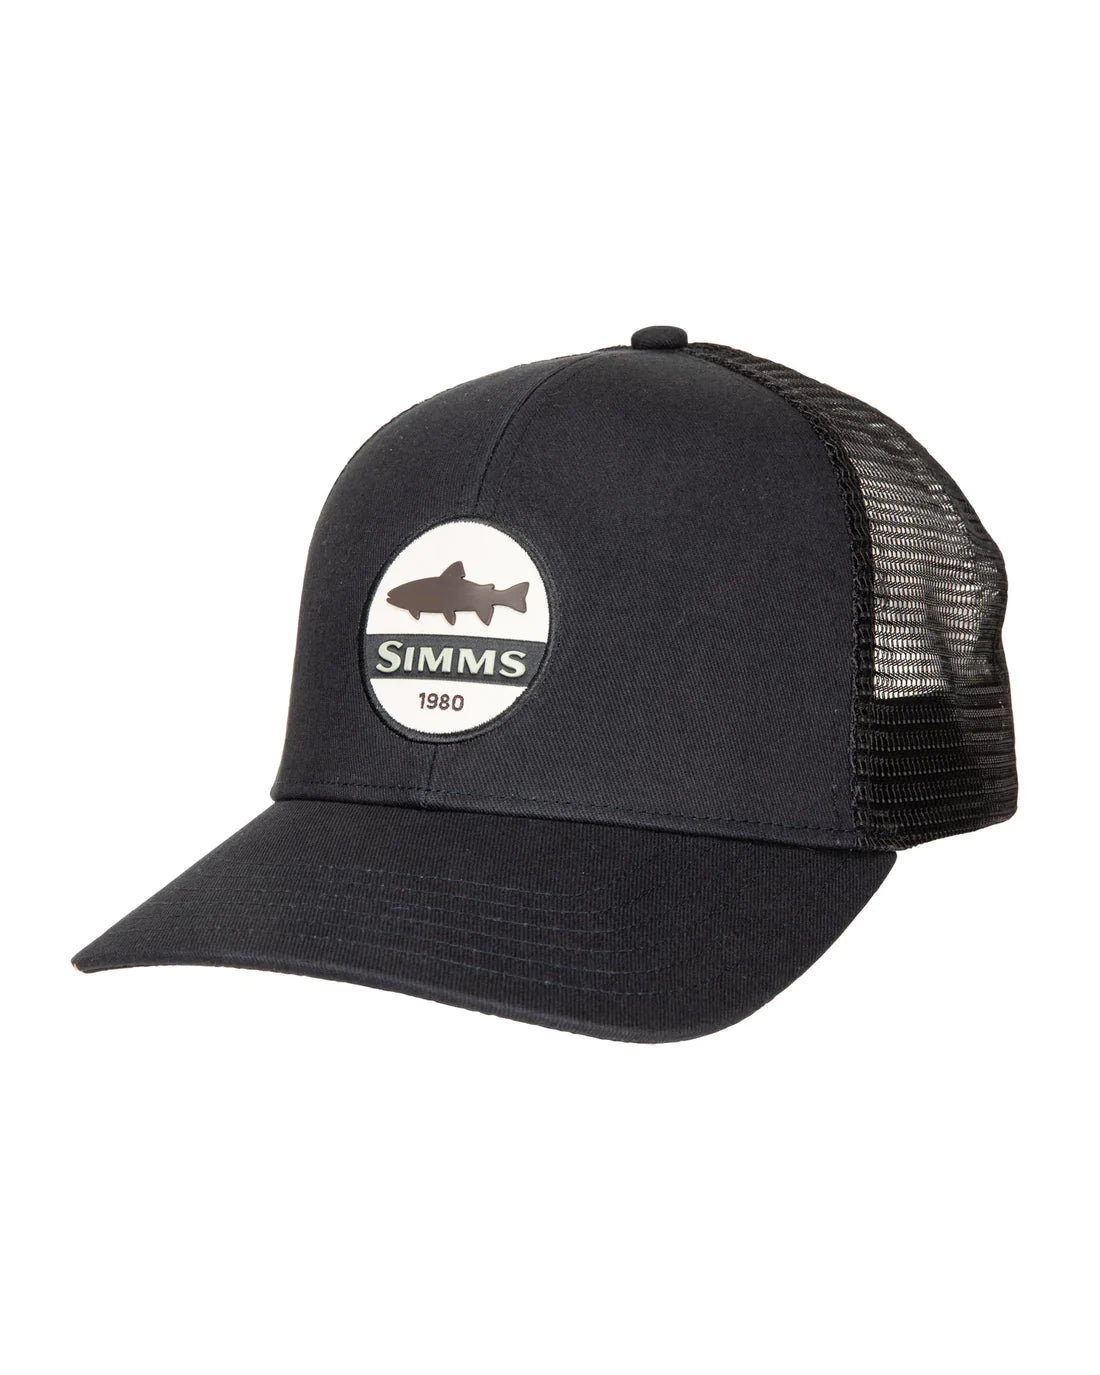 Simms Trout Patch Trucker - OSFM / BLACK - Mansfield Hunting & Fishing - Products to prepare for Corona Virus